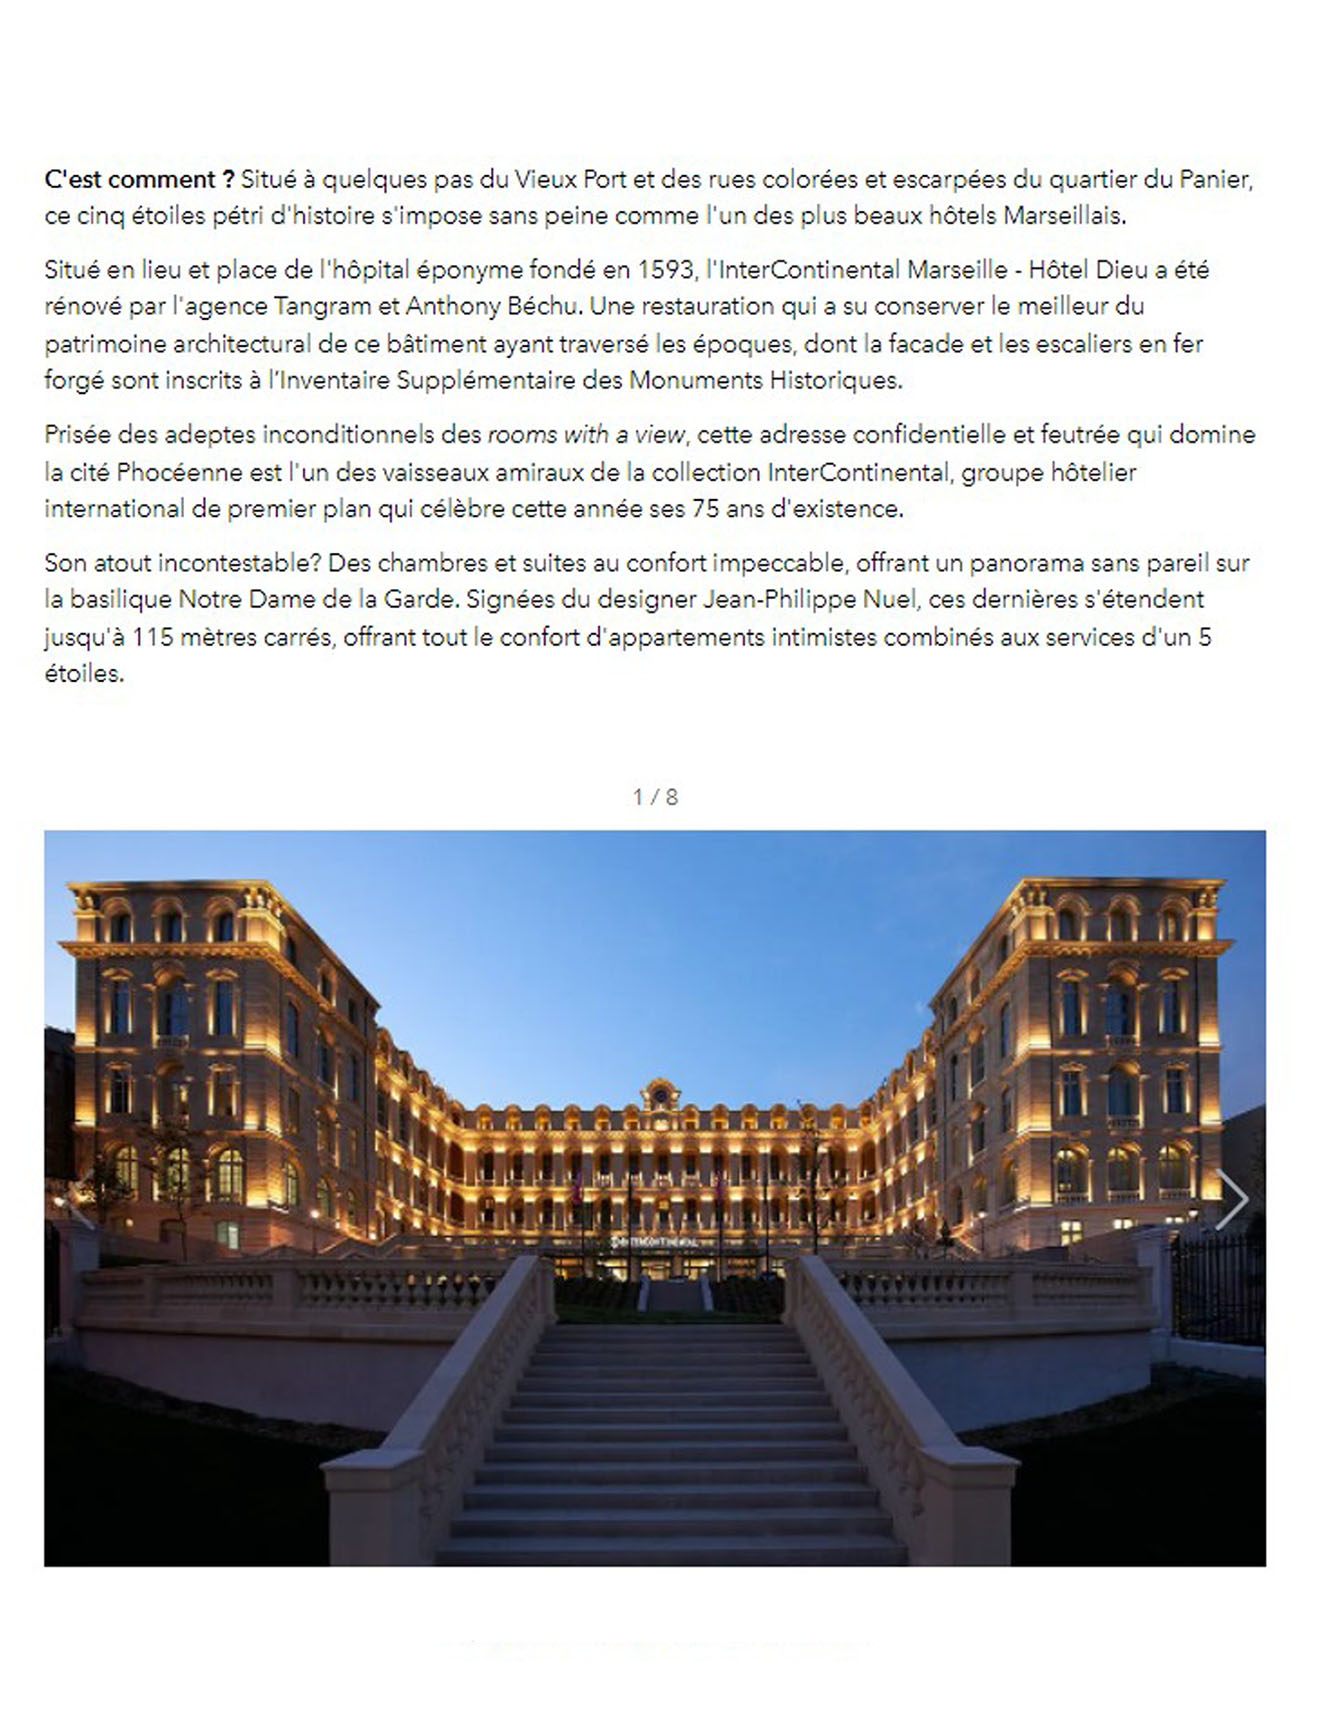 Article from L'officiel about the InterContinental Marseille Hôtel Dieu, a former hospital transformed into a 5-star hotel designed by Jean-Philippe Nuel